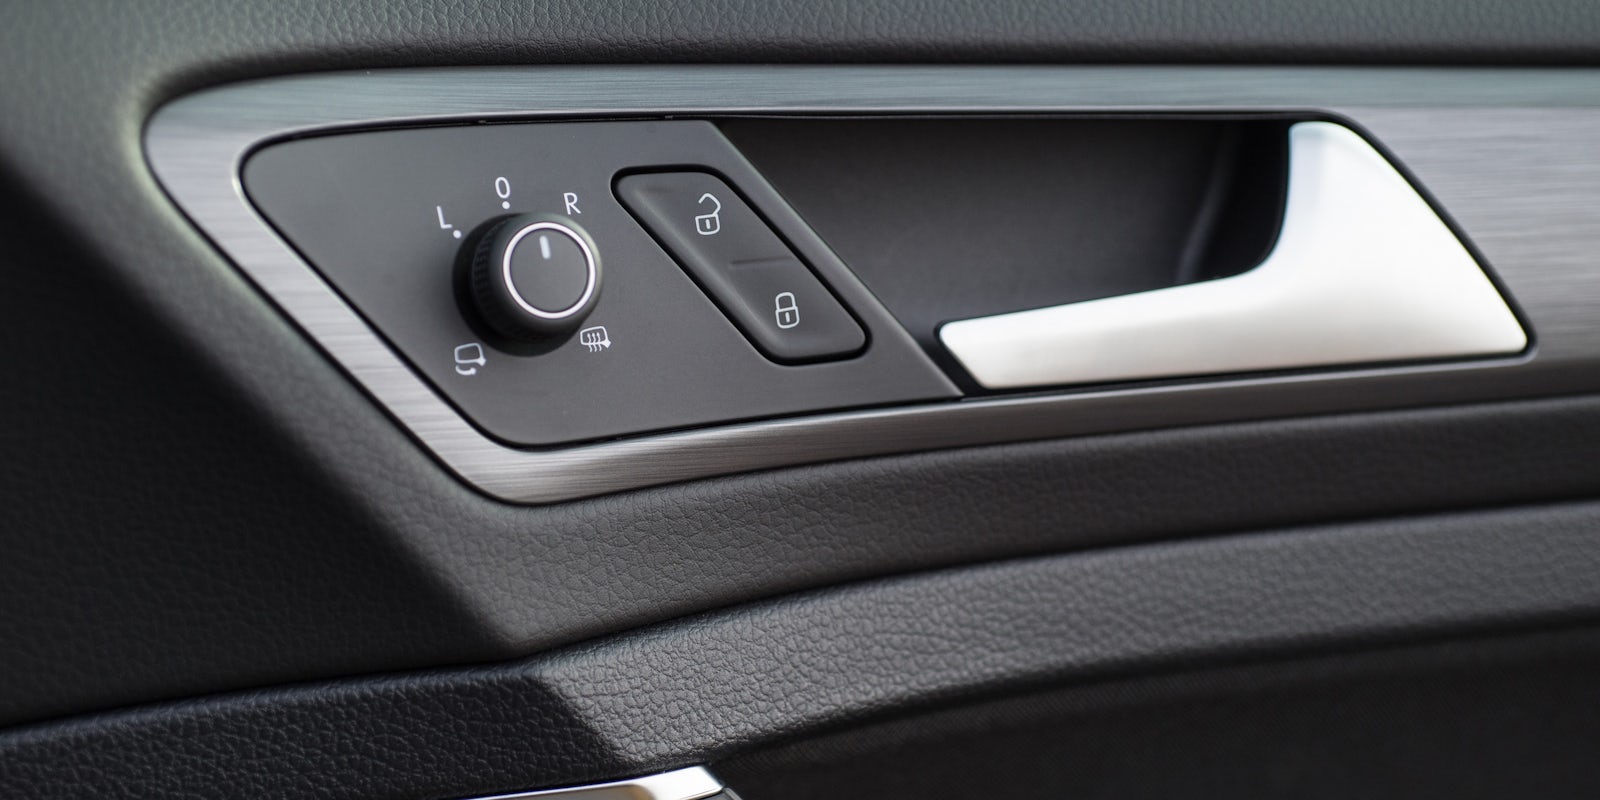 For the R, the regular Golf's dash is livened up with carbon fibre-effect trim pieces